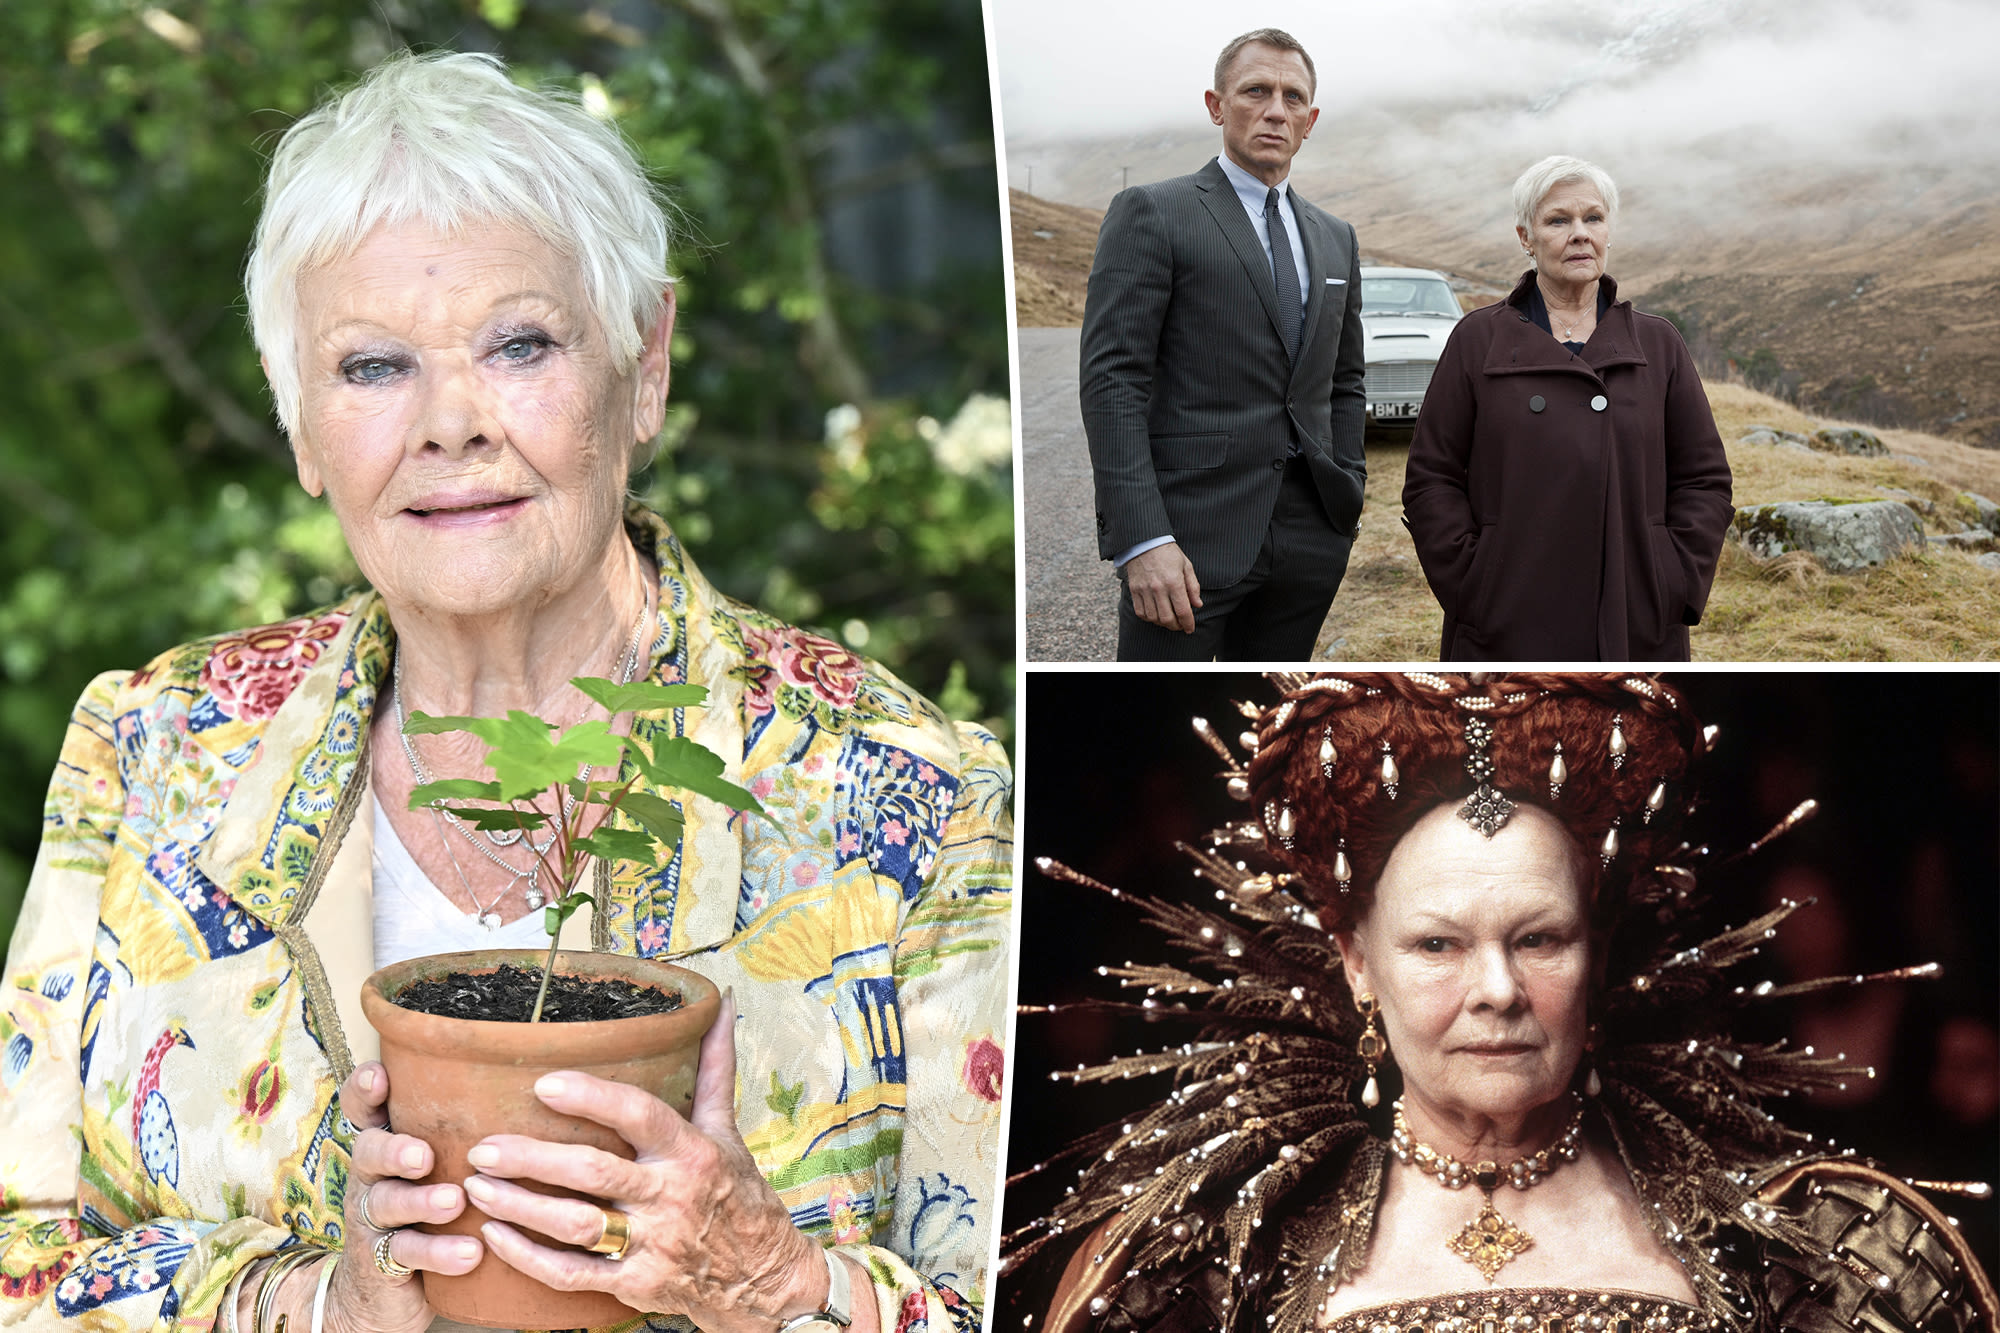 Judi Dench hints film career might be over after 60 years amid eyesight loss: ‘I can’t even see’